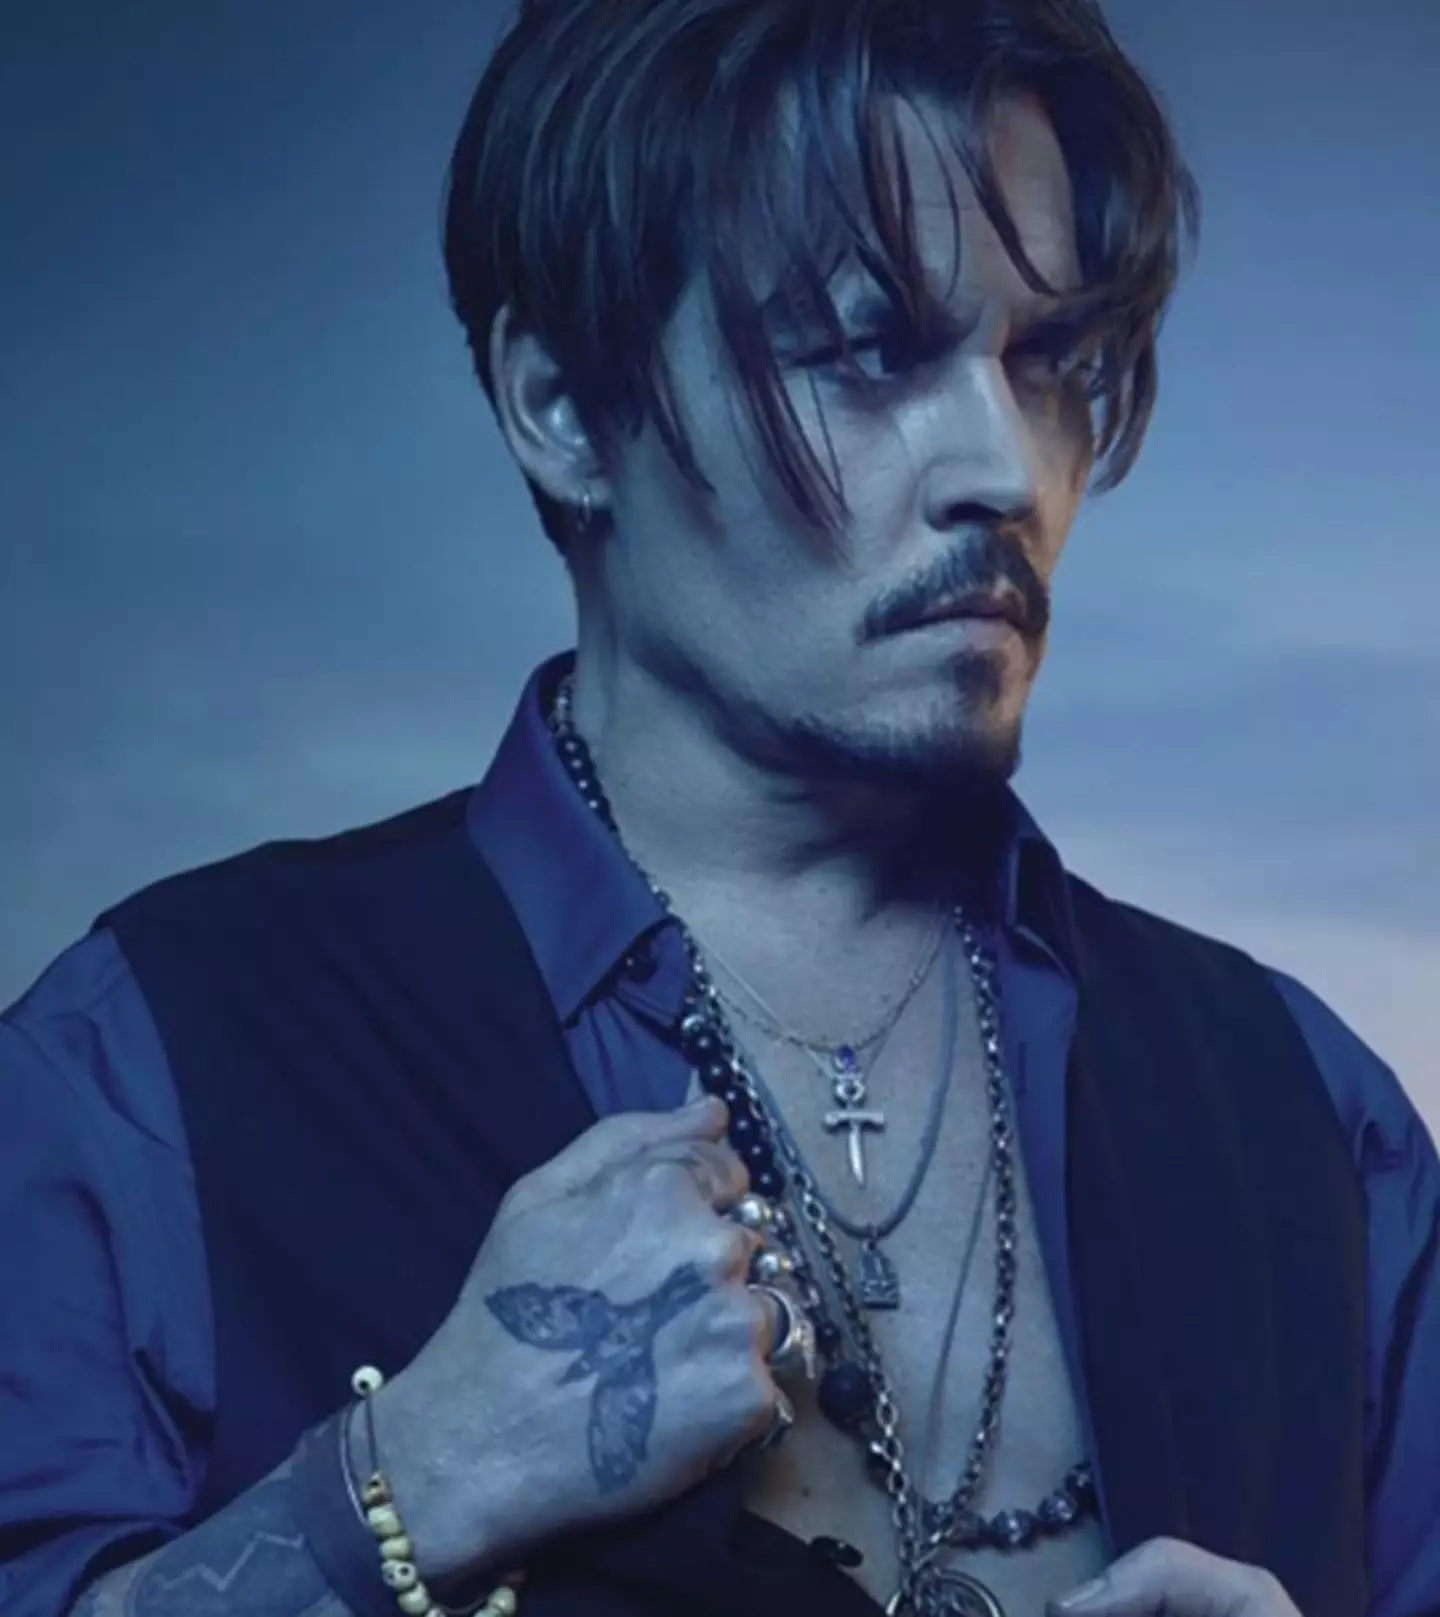 Johnny Depp has been the face of Sauvage since 2015.